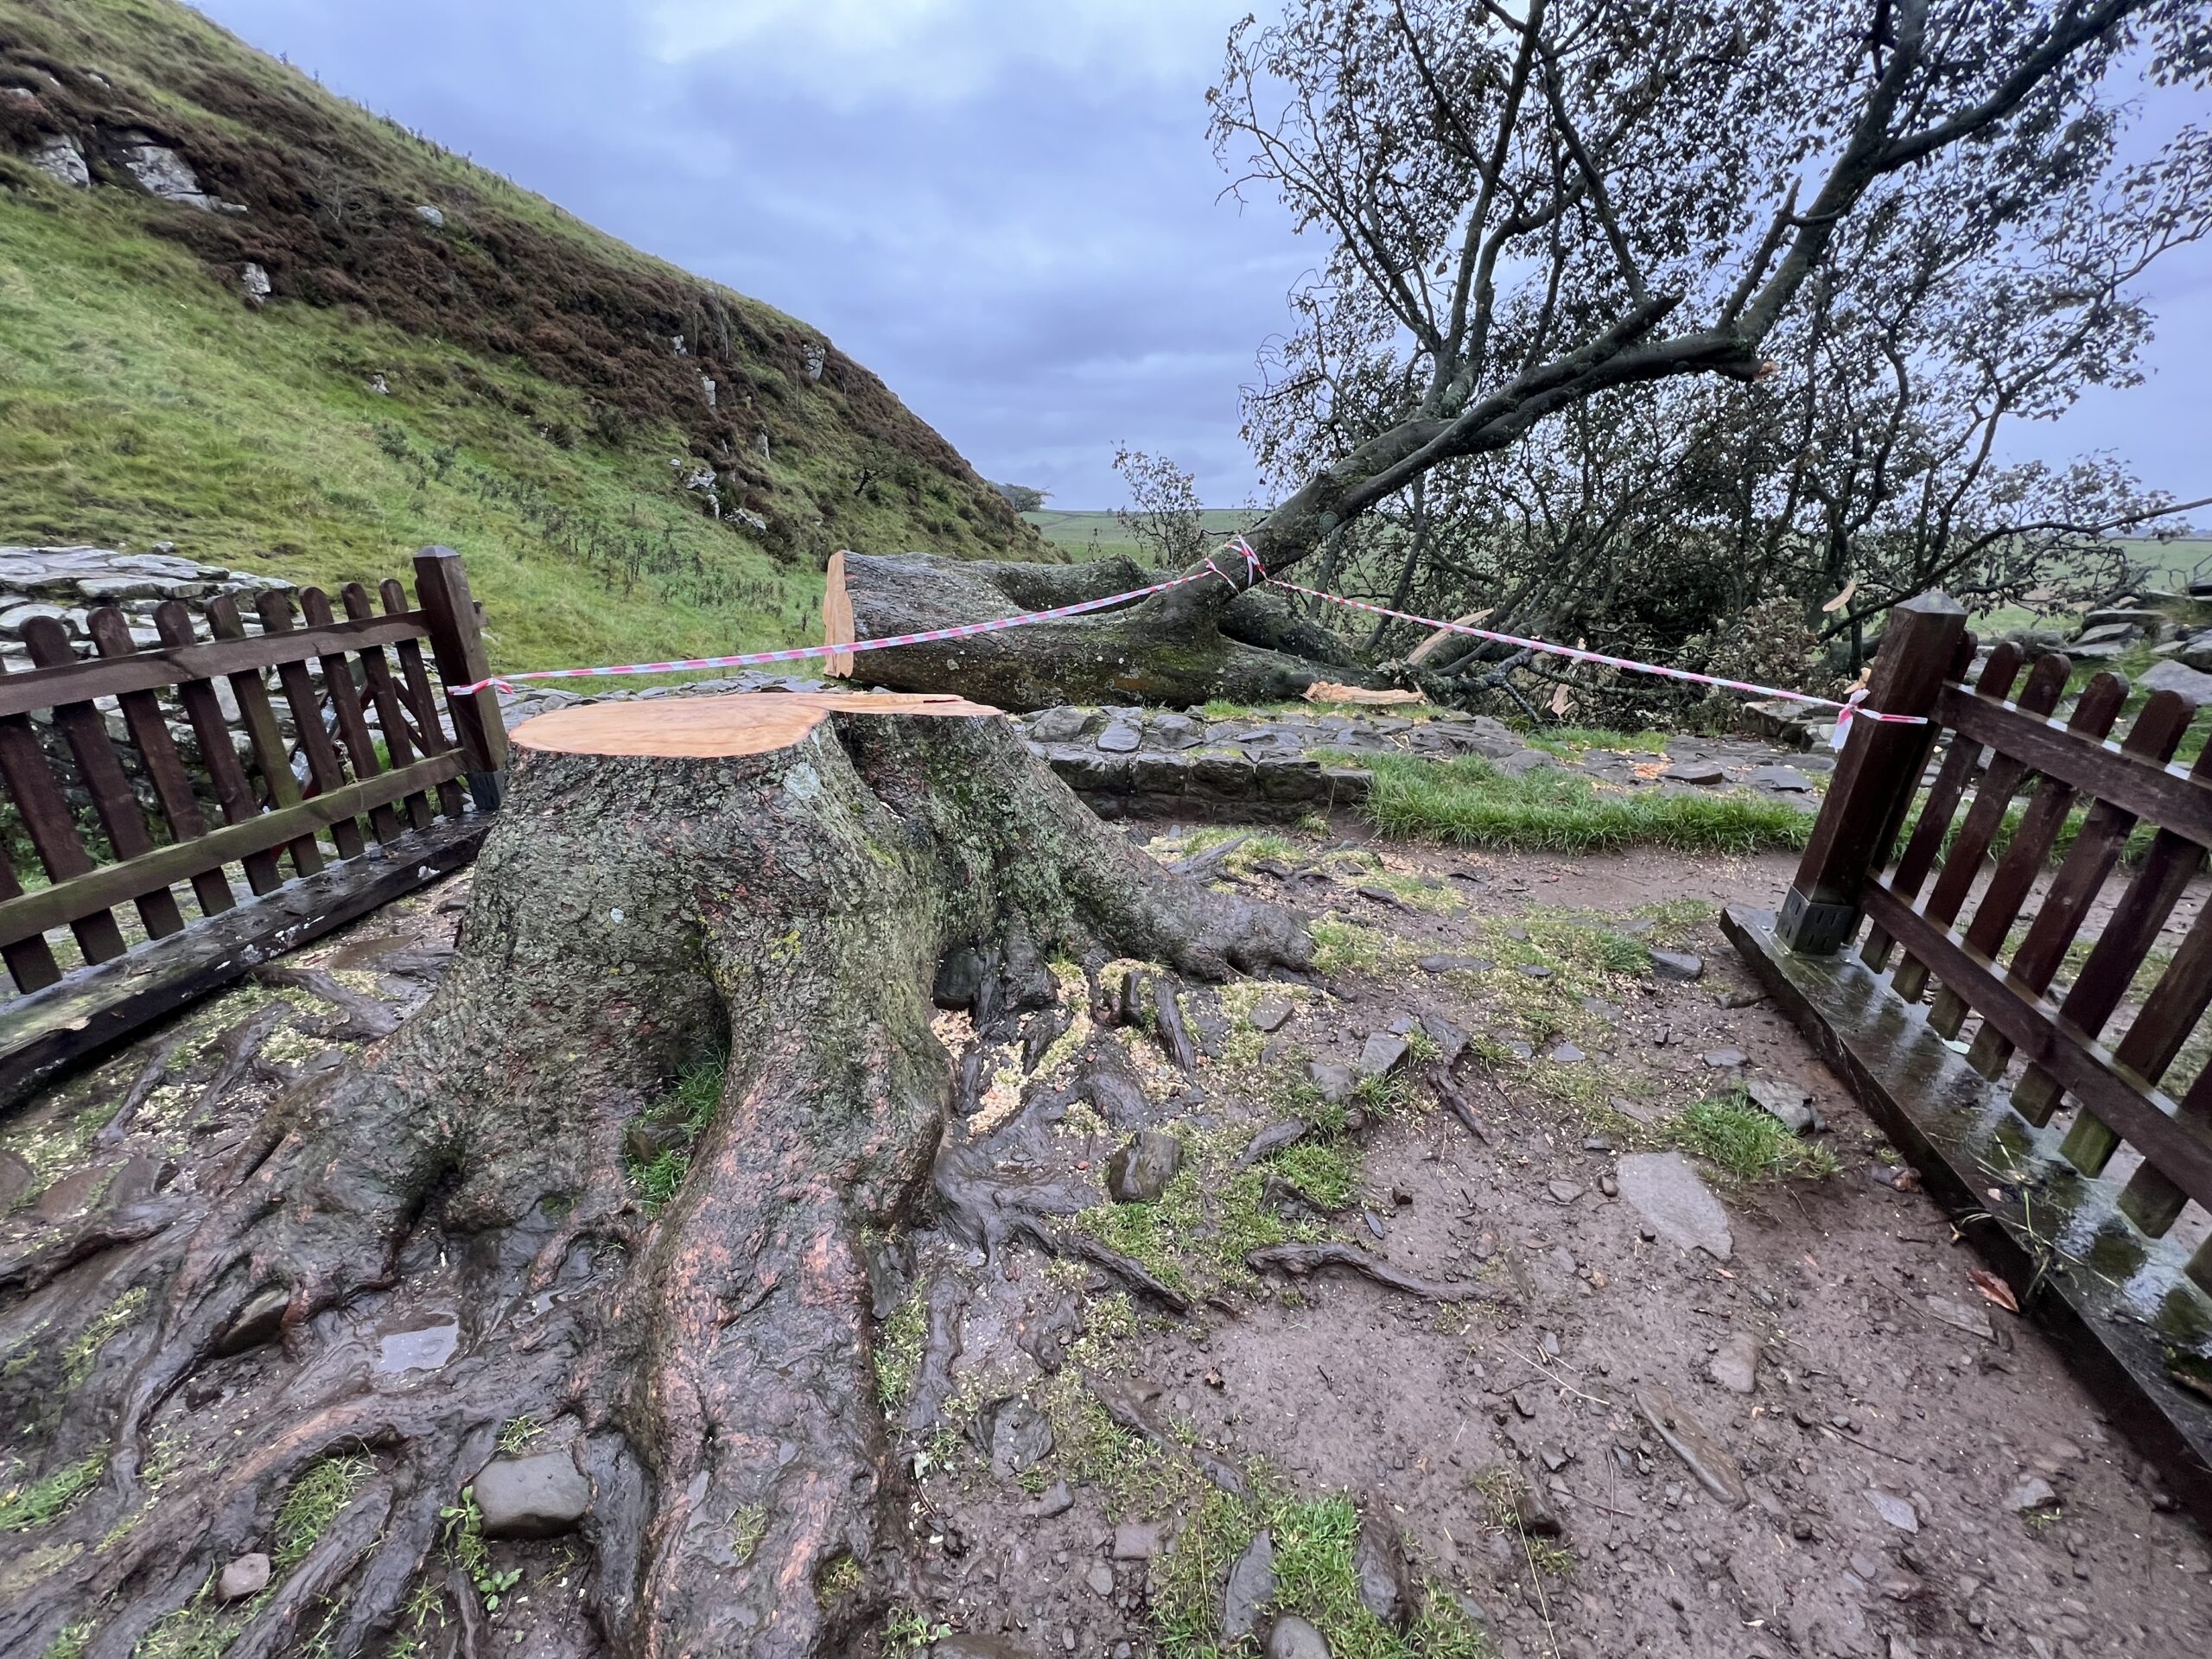 UK Sycamore Gap Tree Mystery: Two Men Charged With Vandalism